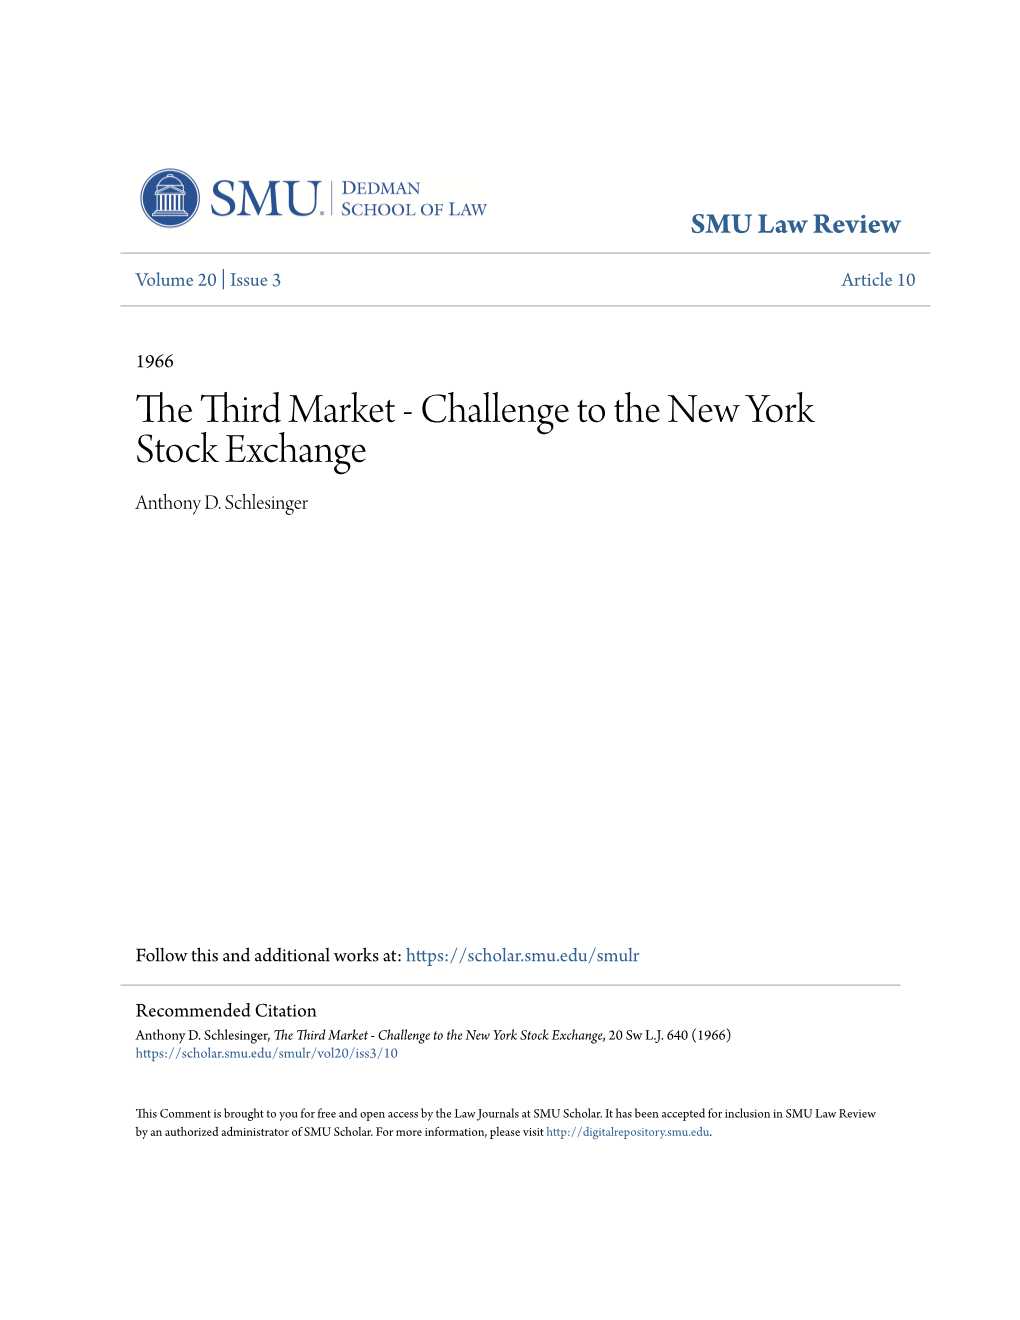 The Third Market - Challenge to the New York Stock Exchange Anthony D